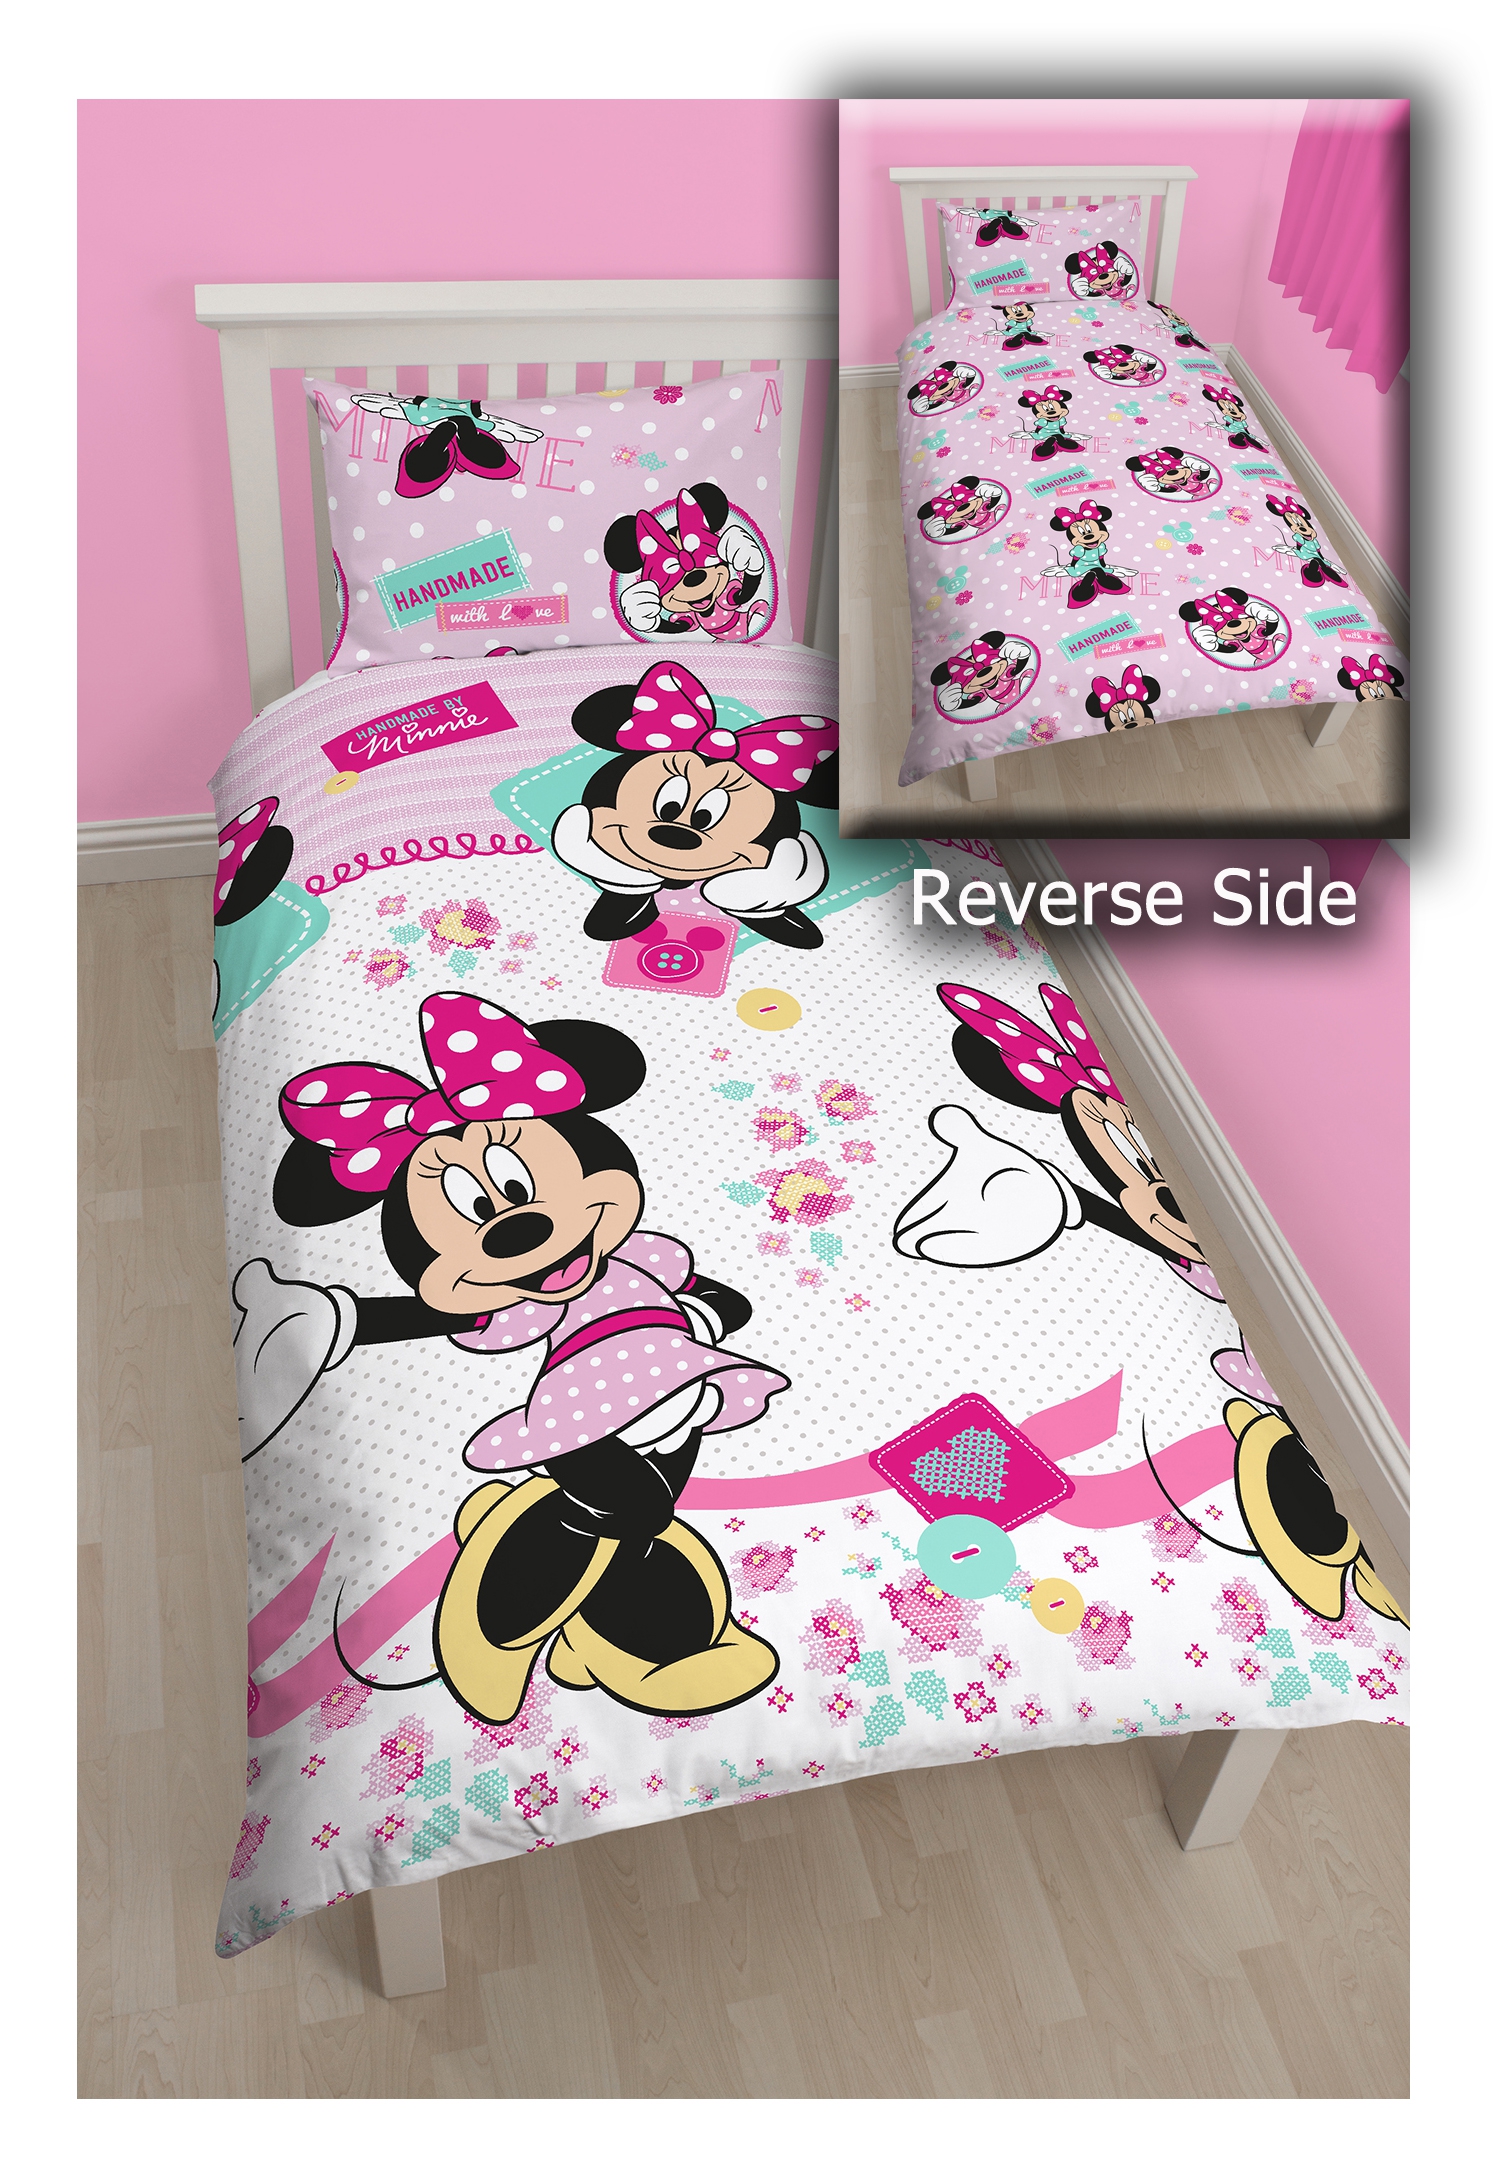 Disney Minnie Mouse 'Handmade' Reversible Rotary Single Bed Duvet Quilt Cover Set